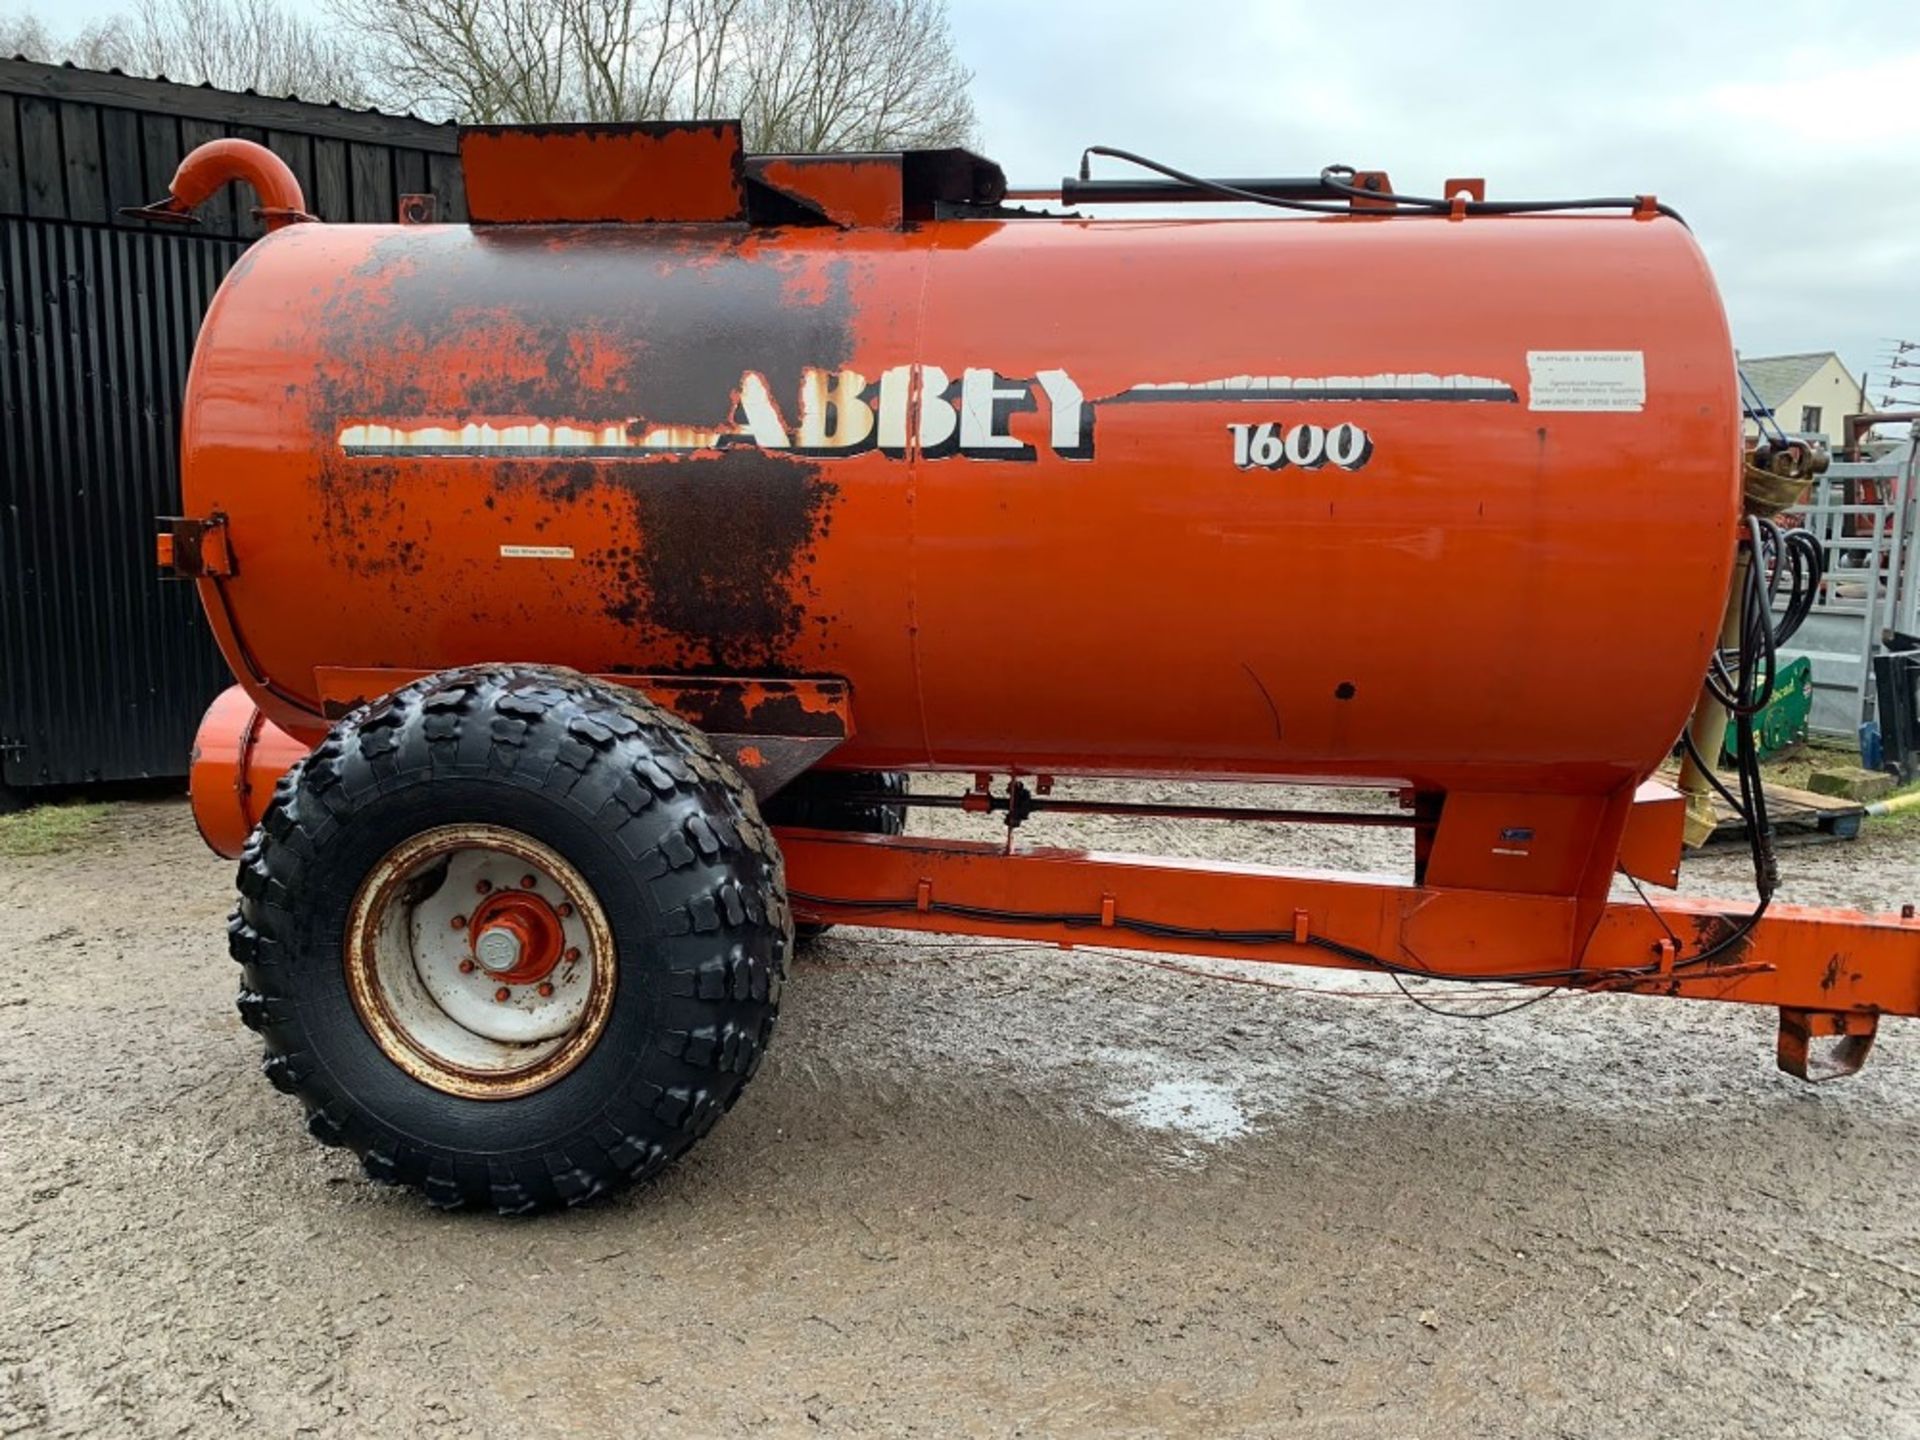 ABBEY 1600 TOP FILL TANKER - Image 2 of 7